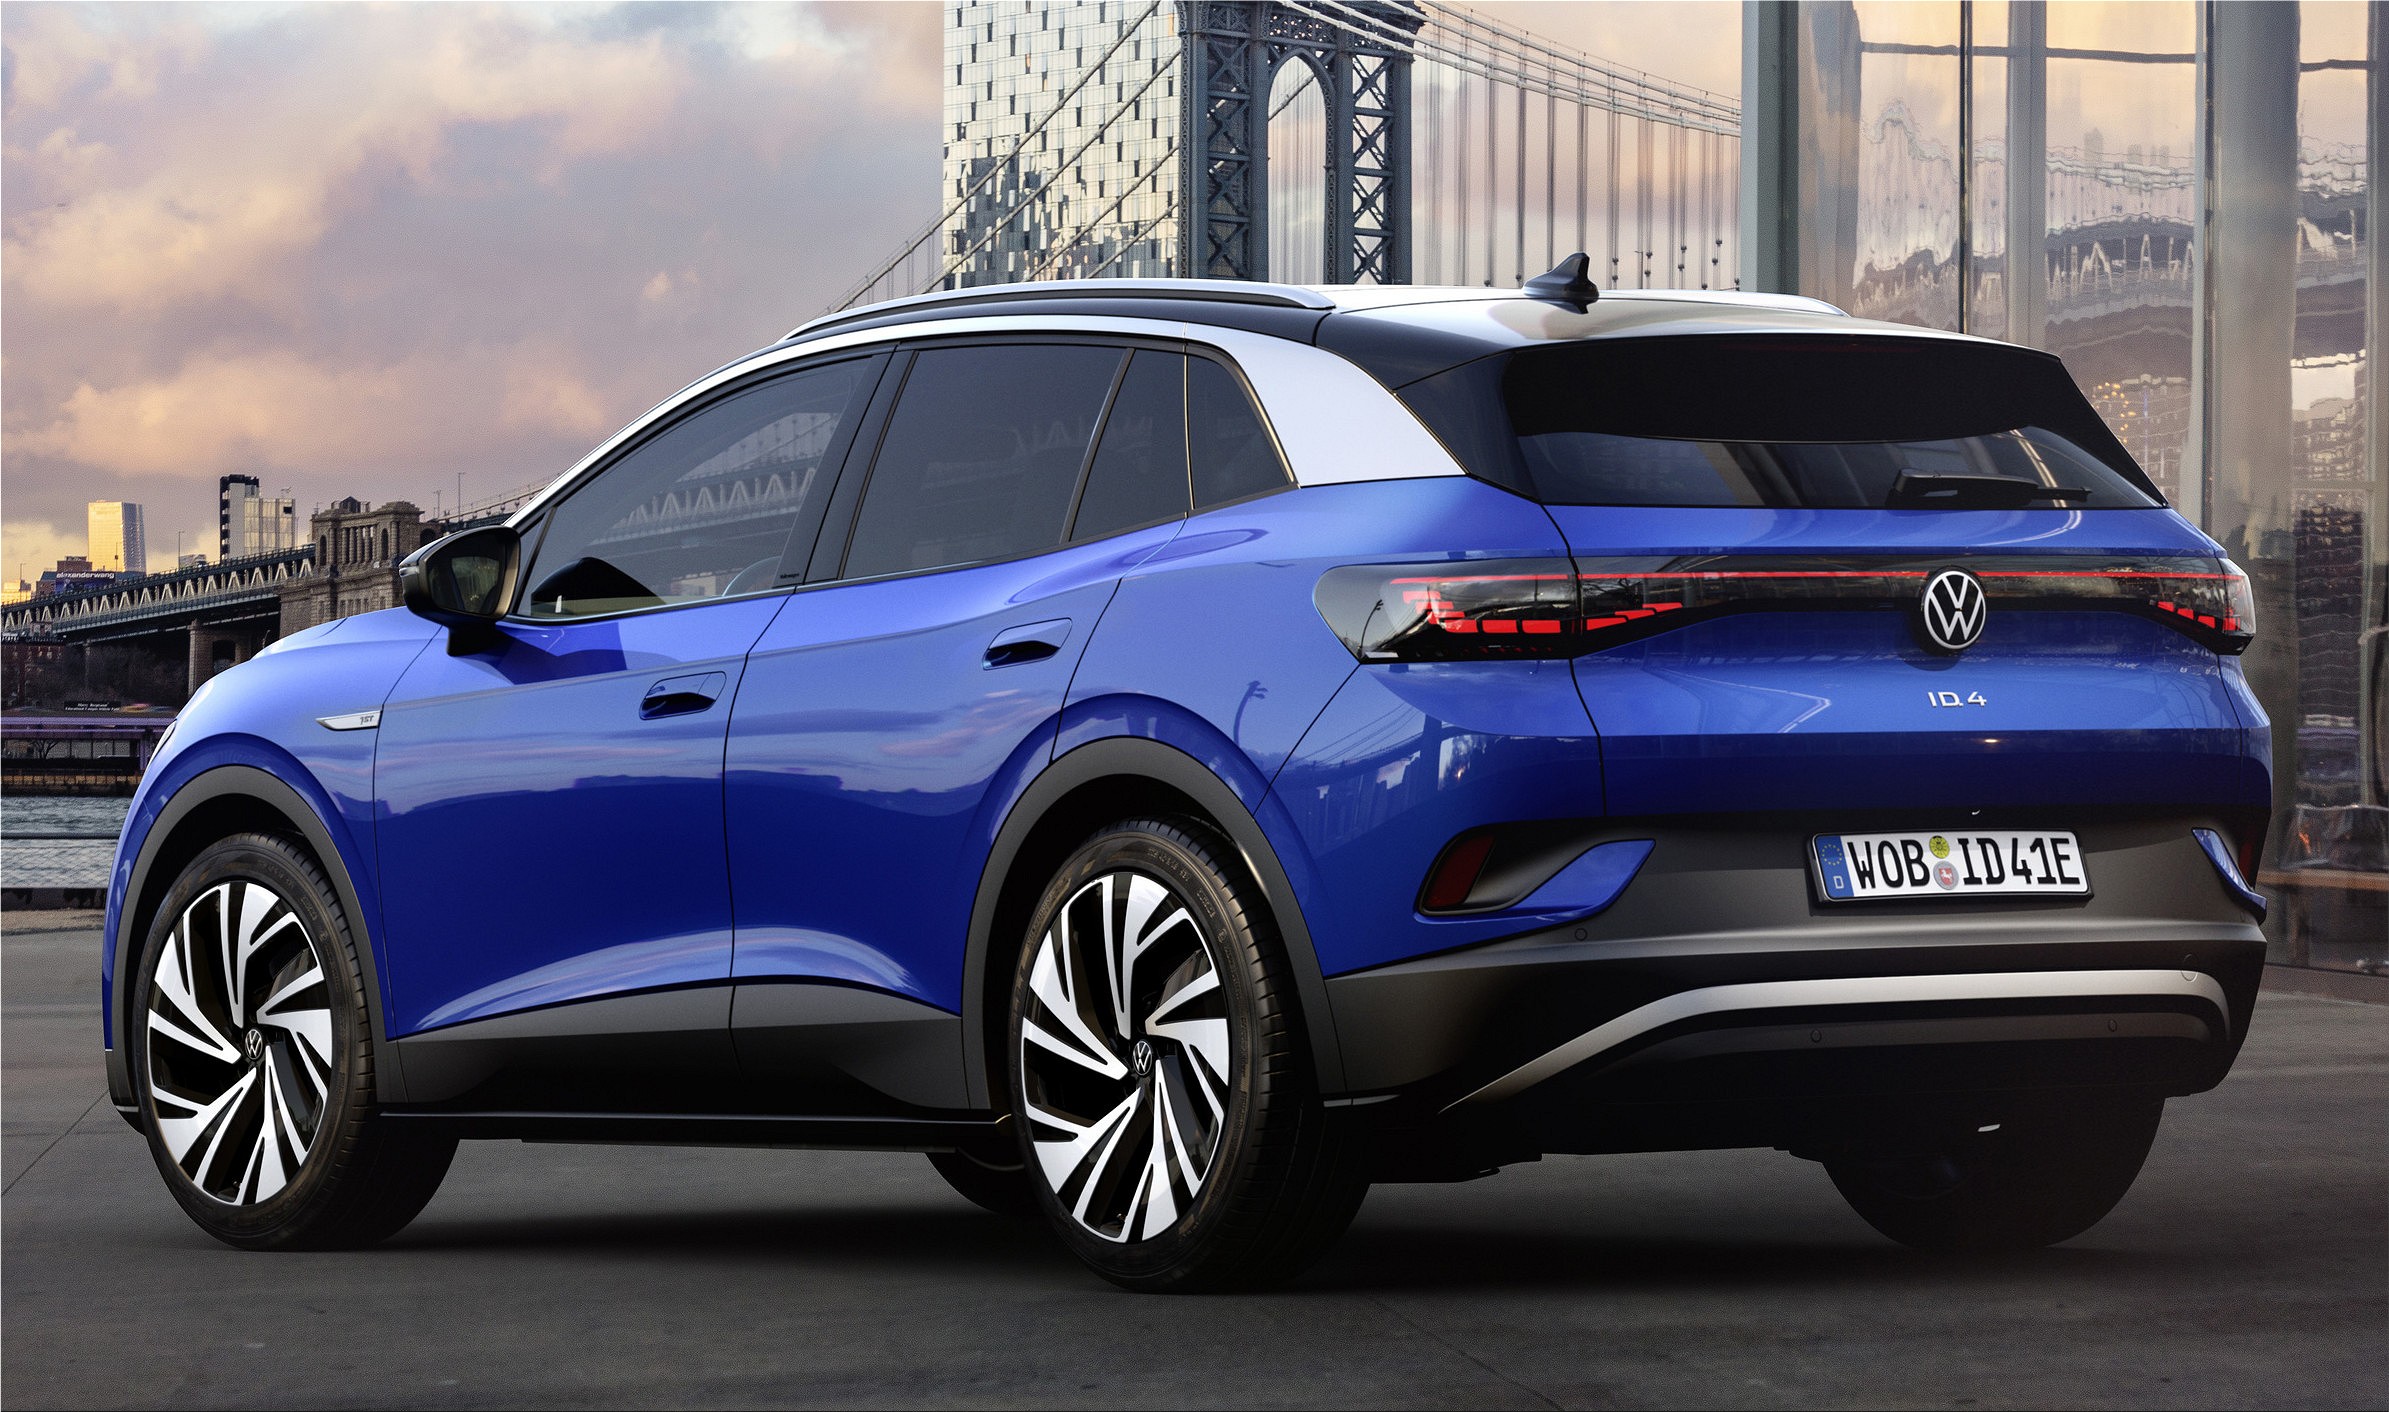 The new Volkswagen ID.4 electric SUV has robust proportions Electric